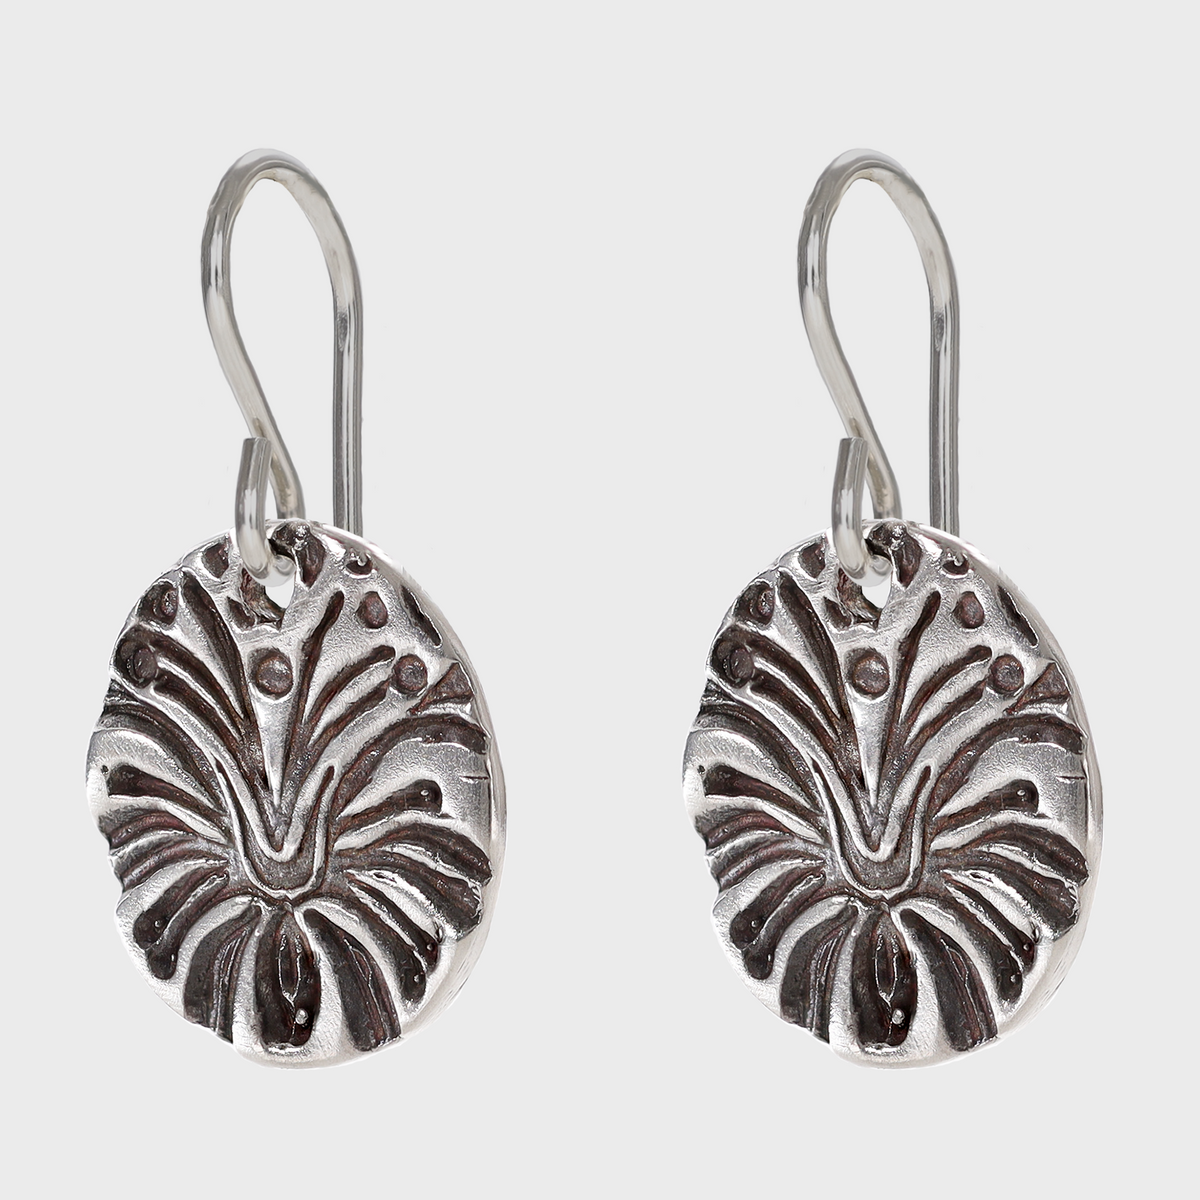 Hibiscus Textured Small Sterling Silver Earrings on Short Ear Wires